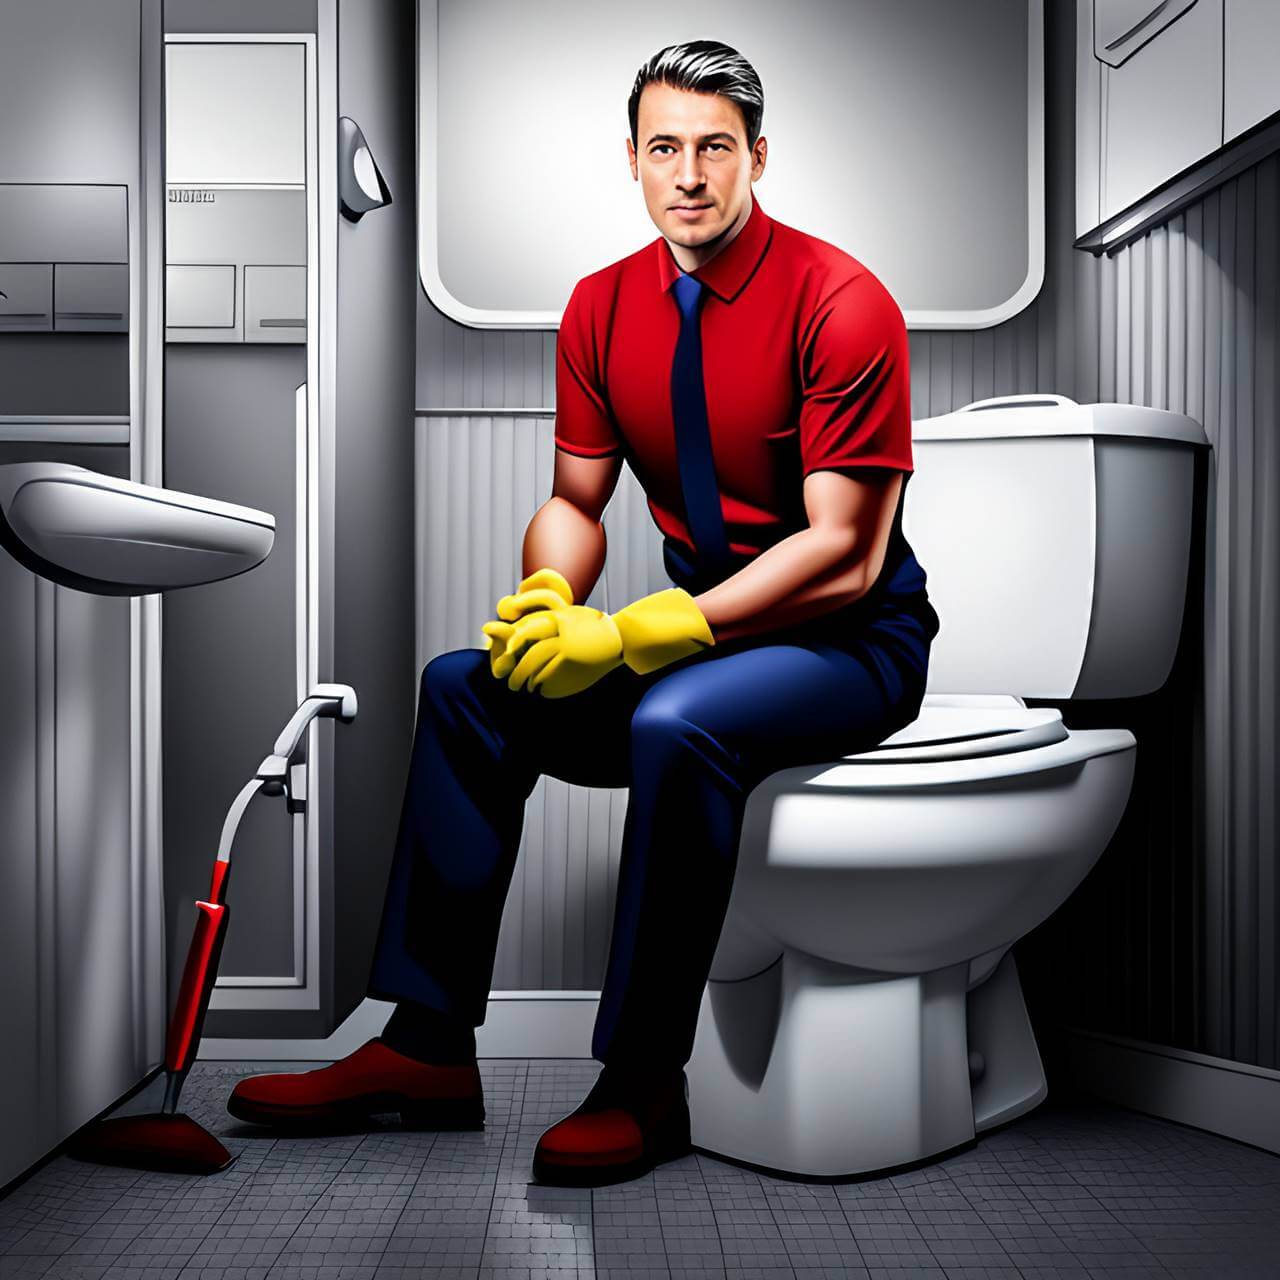 male crew cleaning cabin toilet